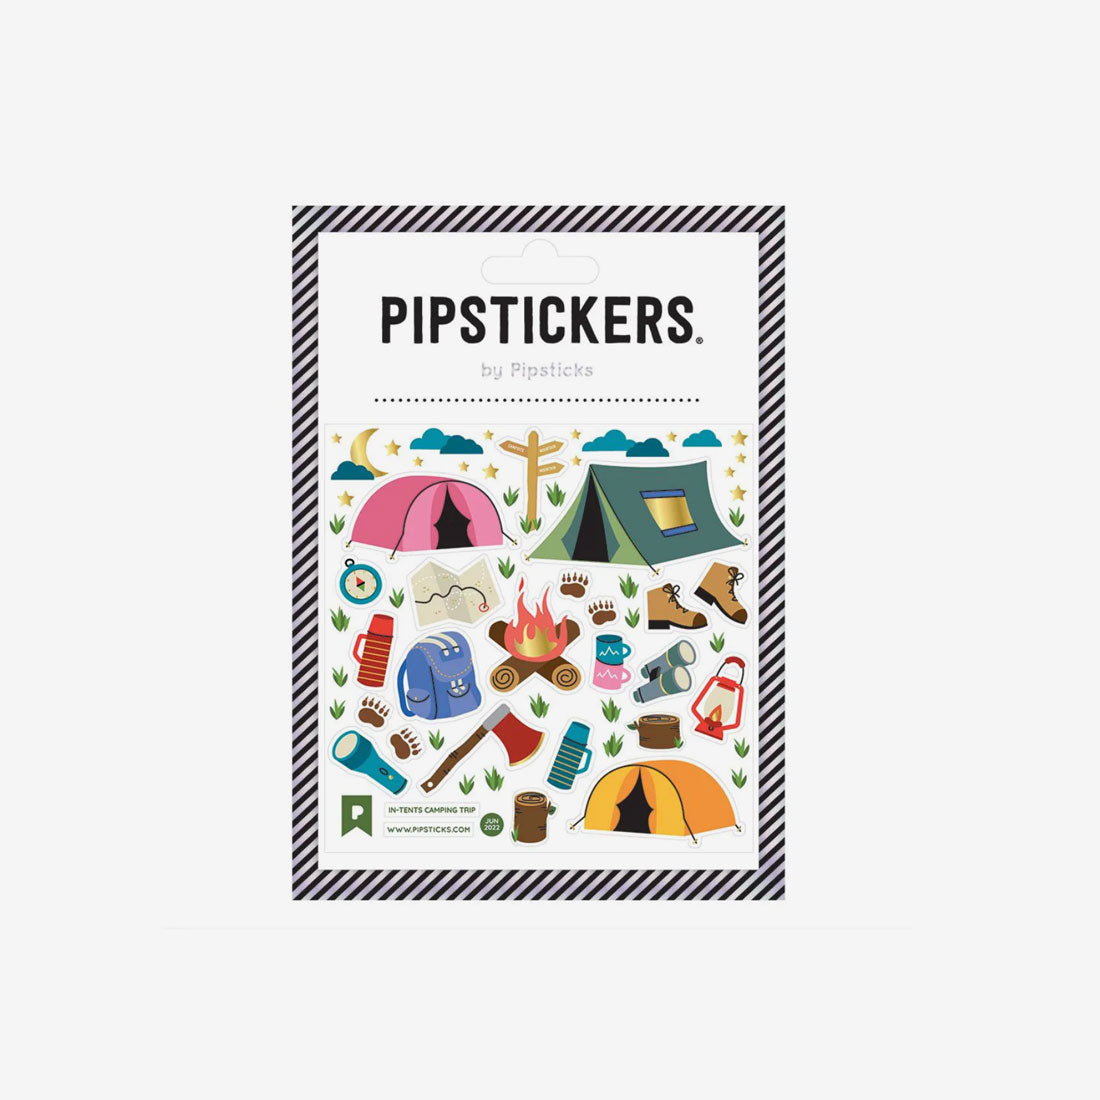 Pipstickers - In-Tents Camping Trip